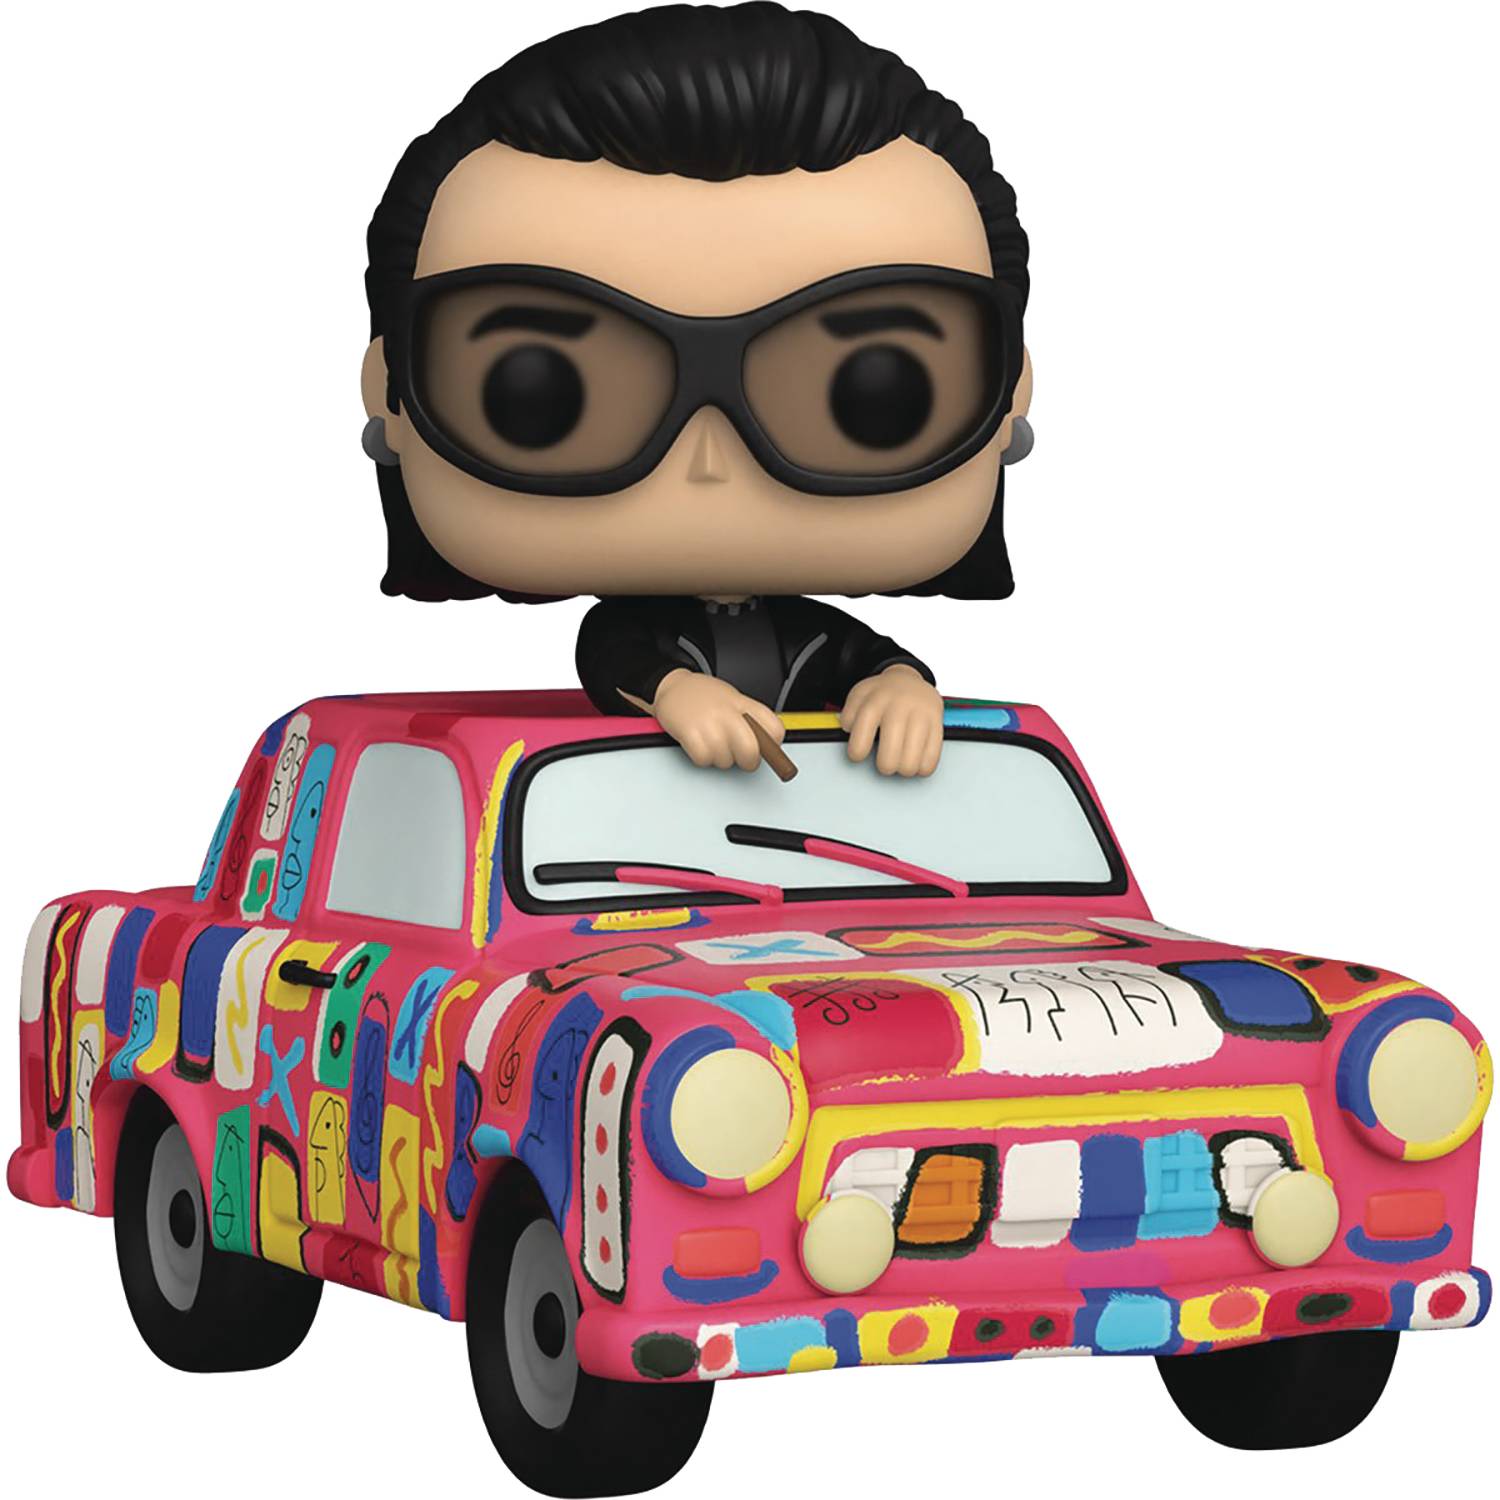 Bono With Achtung Baby Car 293 (8/10 Condition)